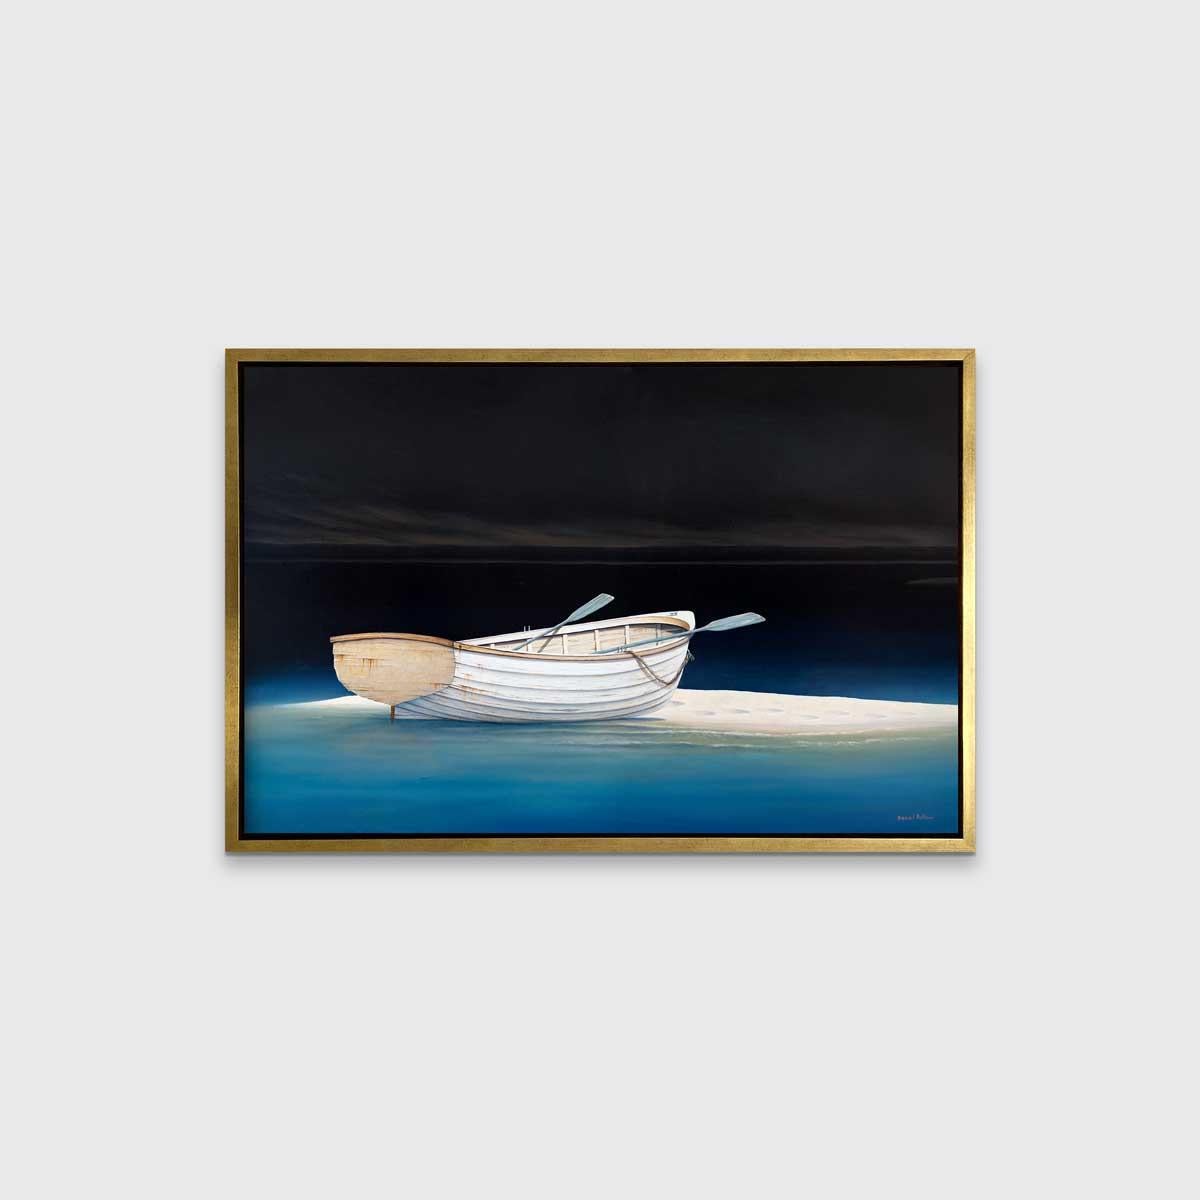 This coastal Limited Edition print by Daniel Pollera depicts a brightly-lit row boat, with two ores resting on either edge of the boat, sitting on a small island of sand in the water. Deep blue water surrounds the sand, and turns to near back as it